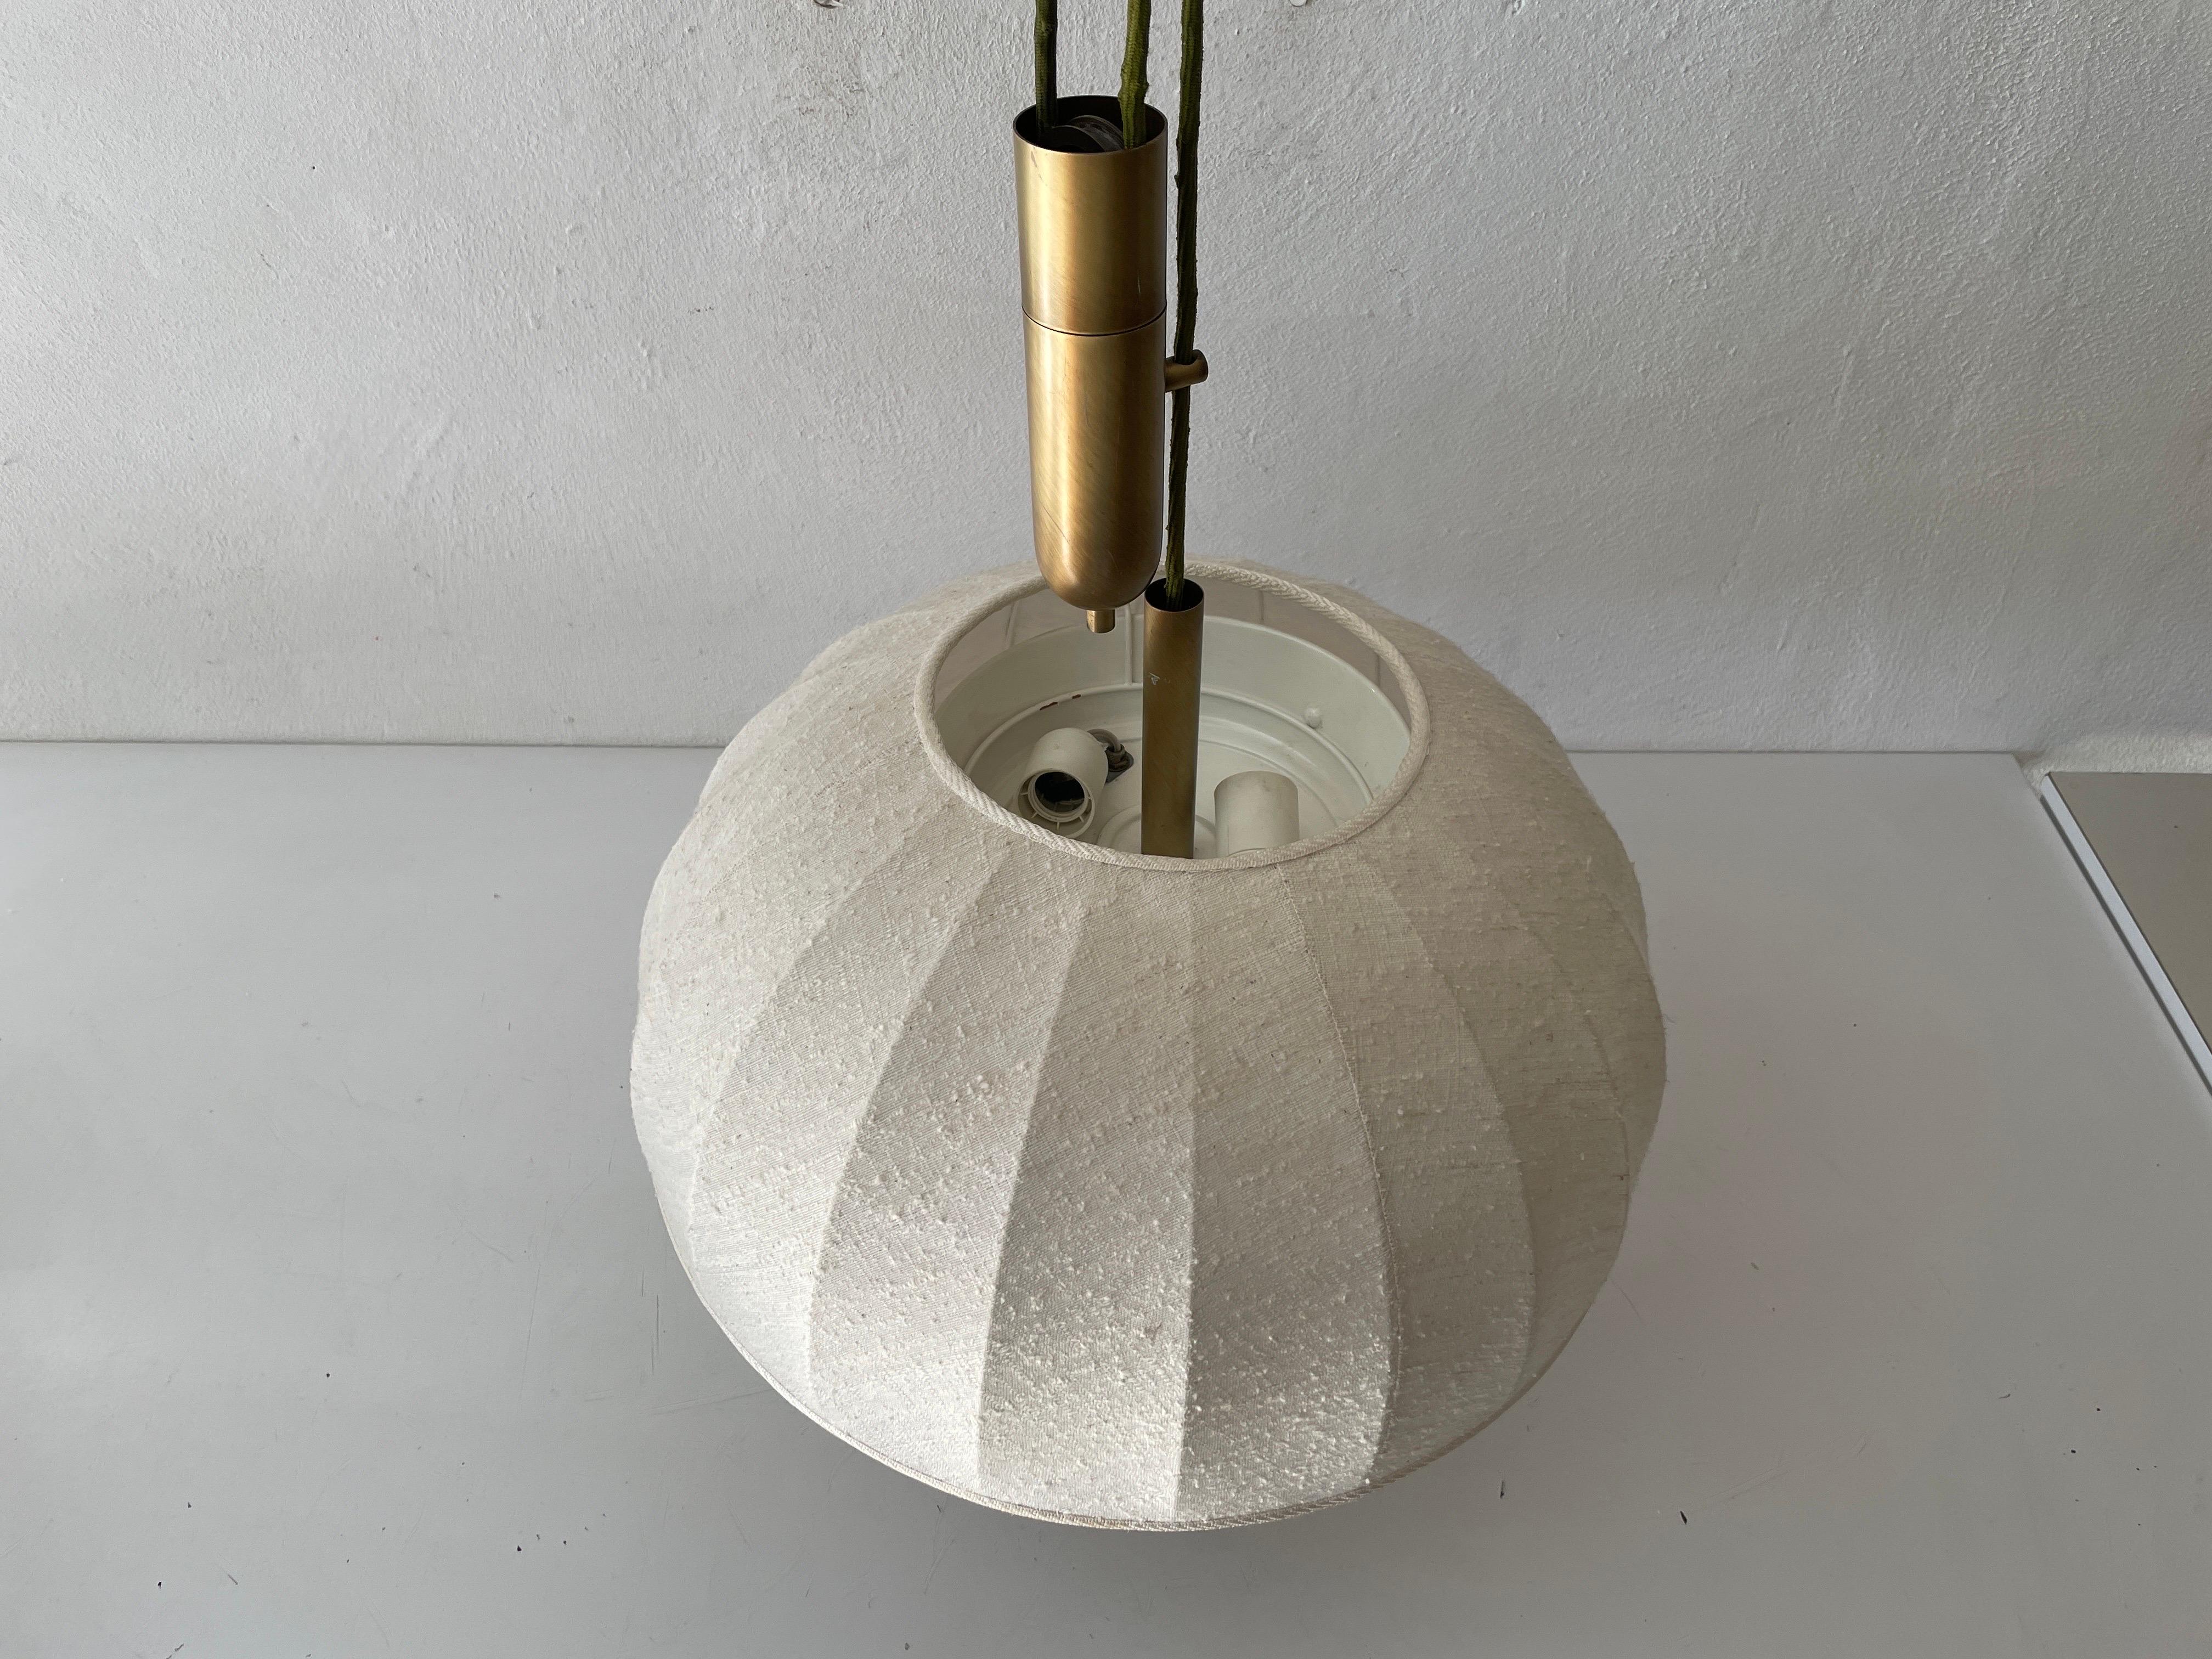 Brass & Fabric Shade Counterweight Pendant Lamp by Wkr, 1970s, Germany 3